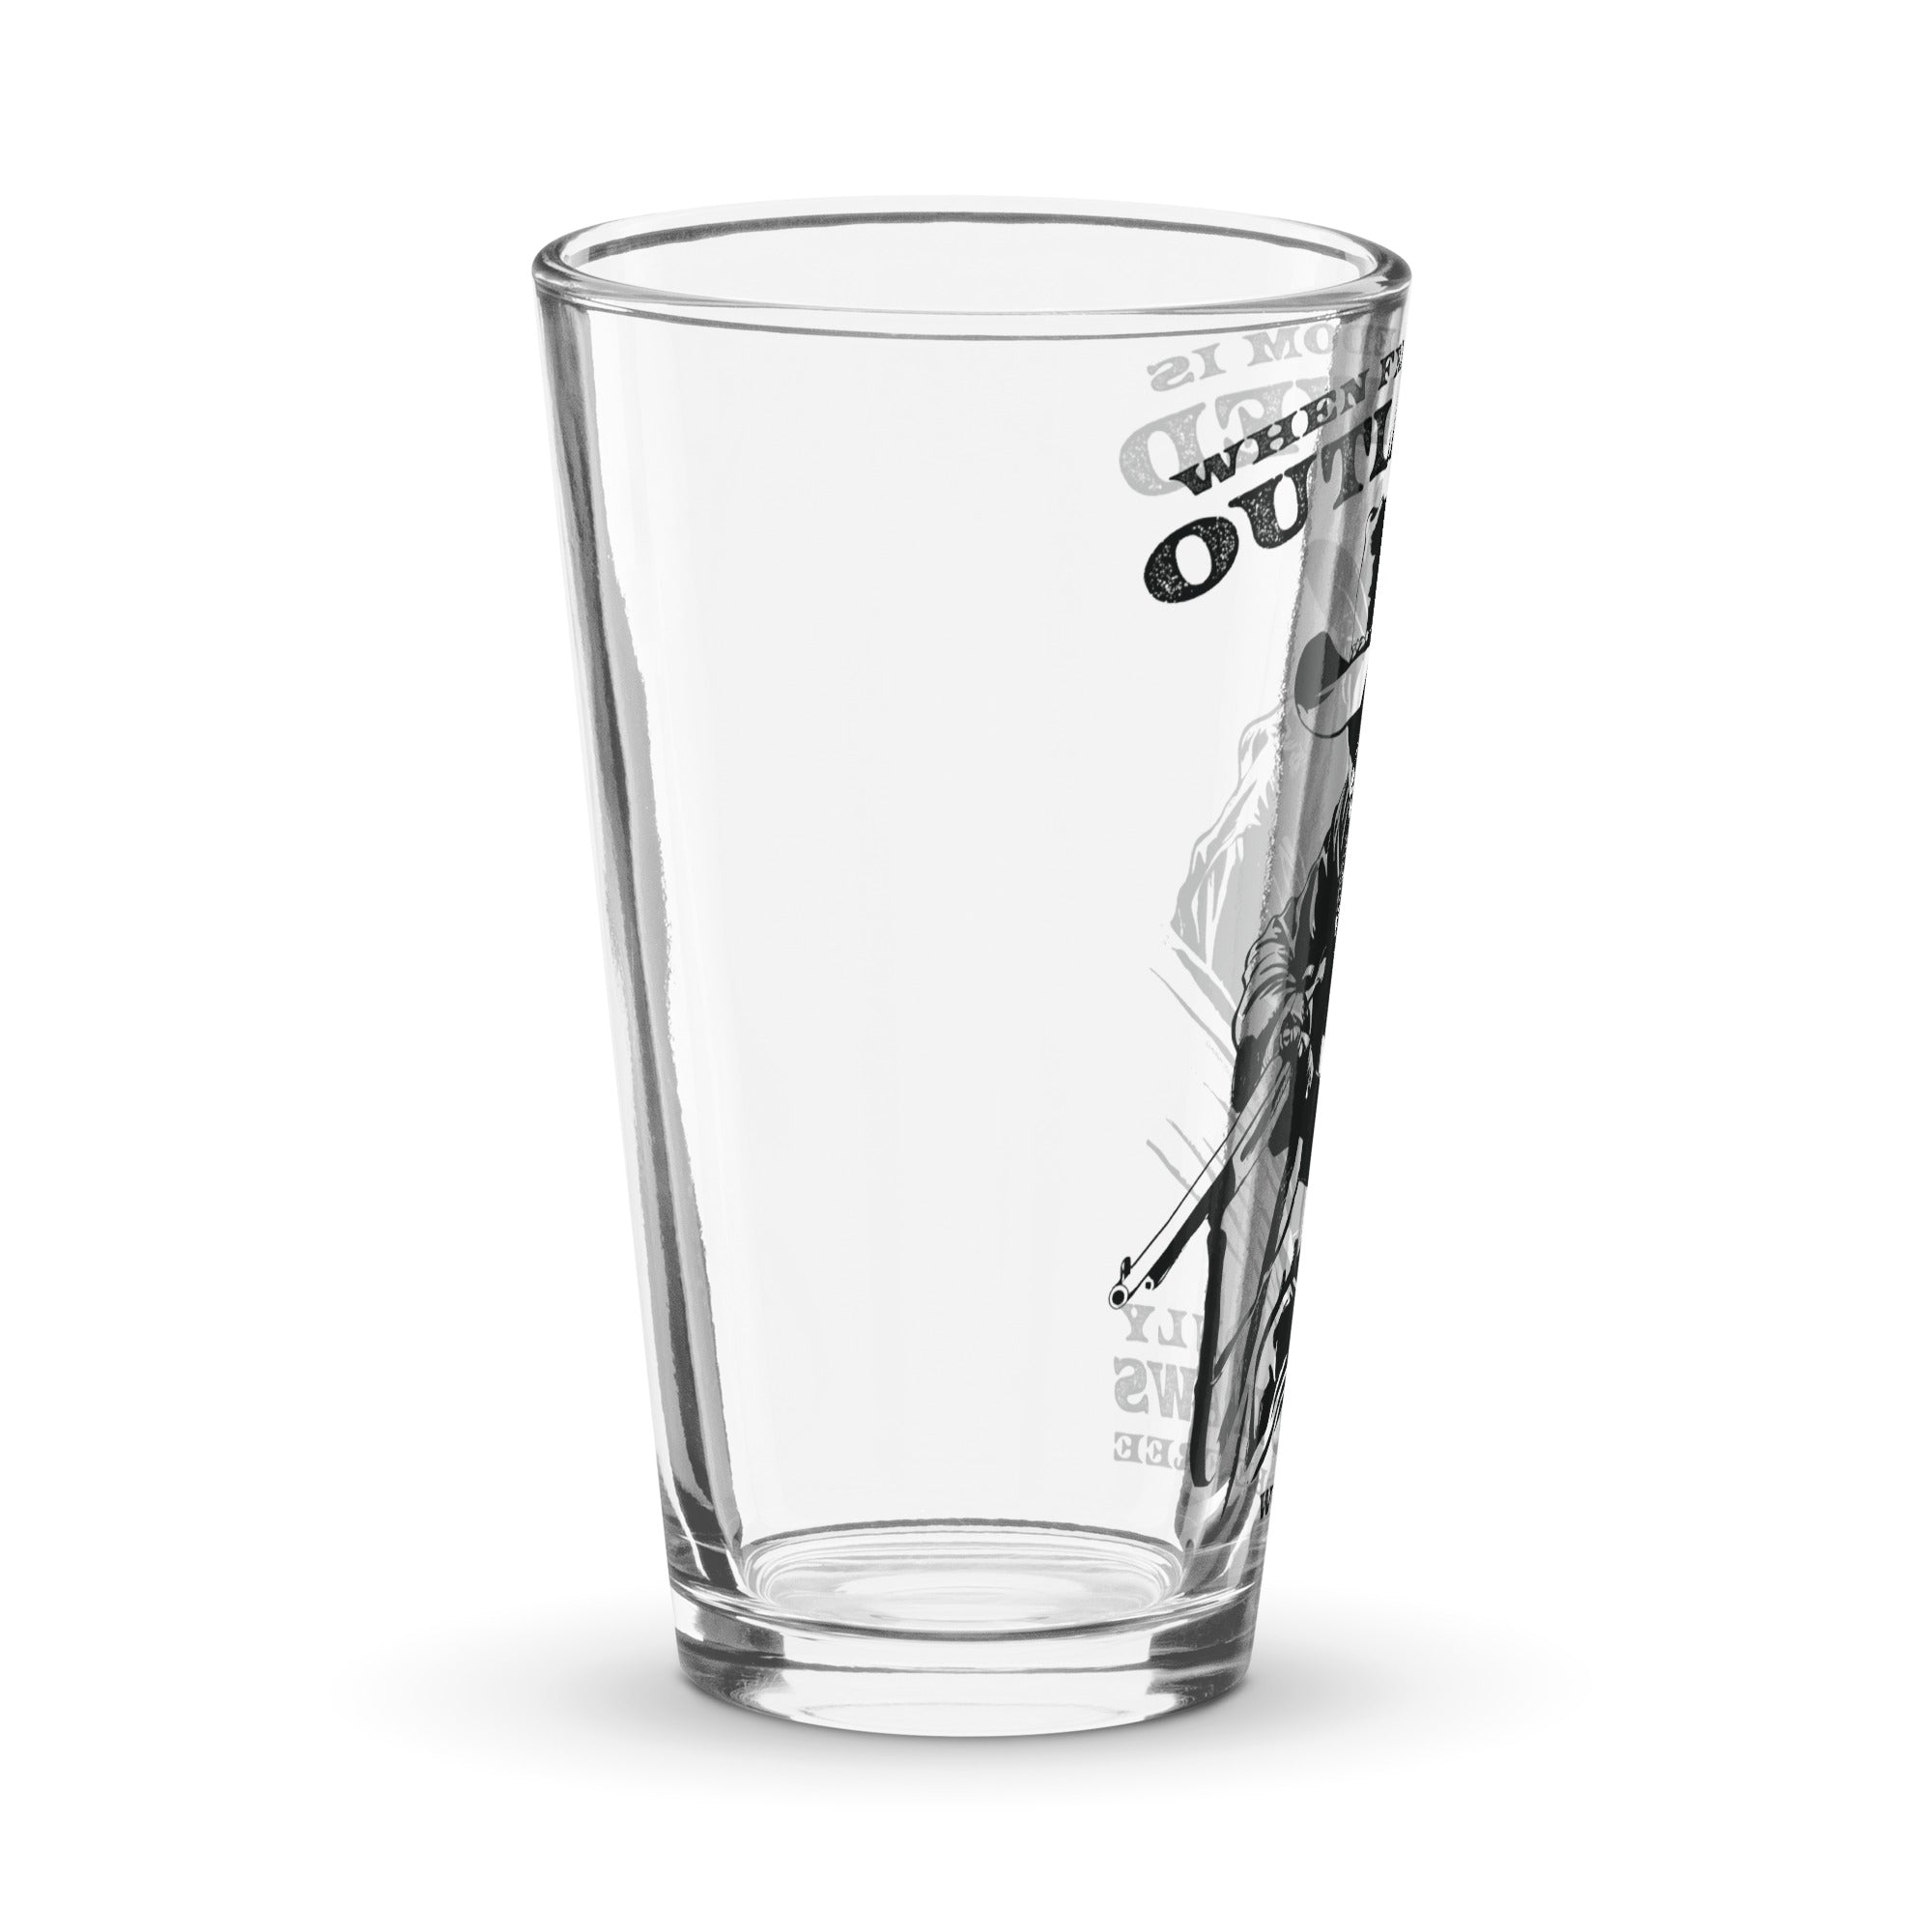 When Freedom is Outlawed Only Outlaws Will Be Free Pint Glass